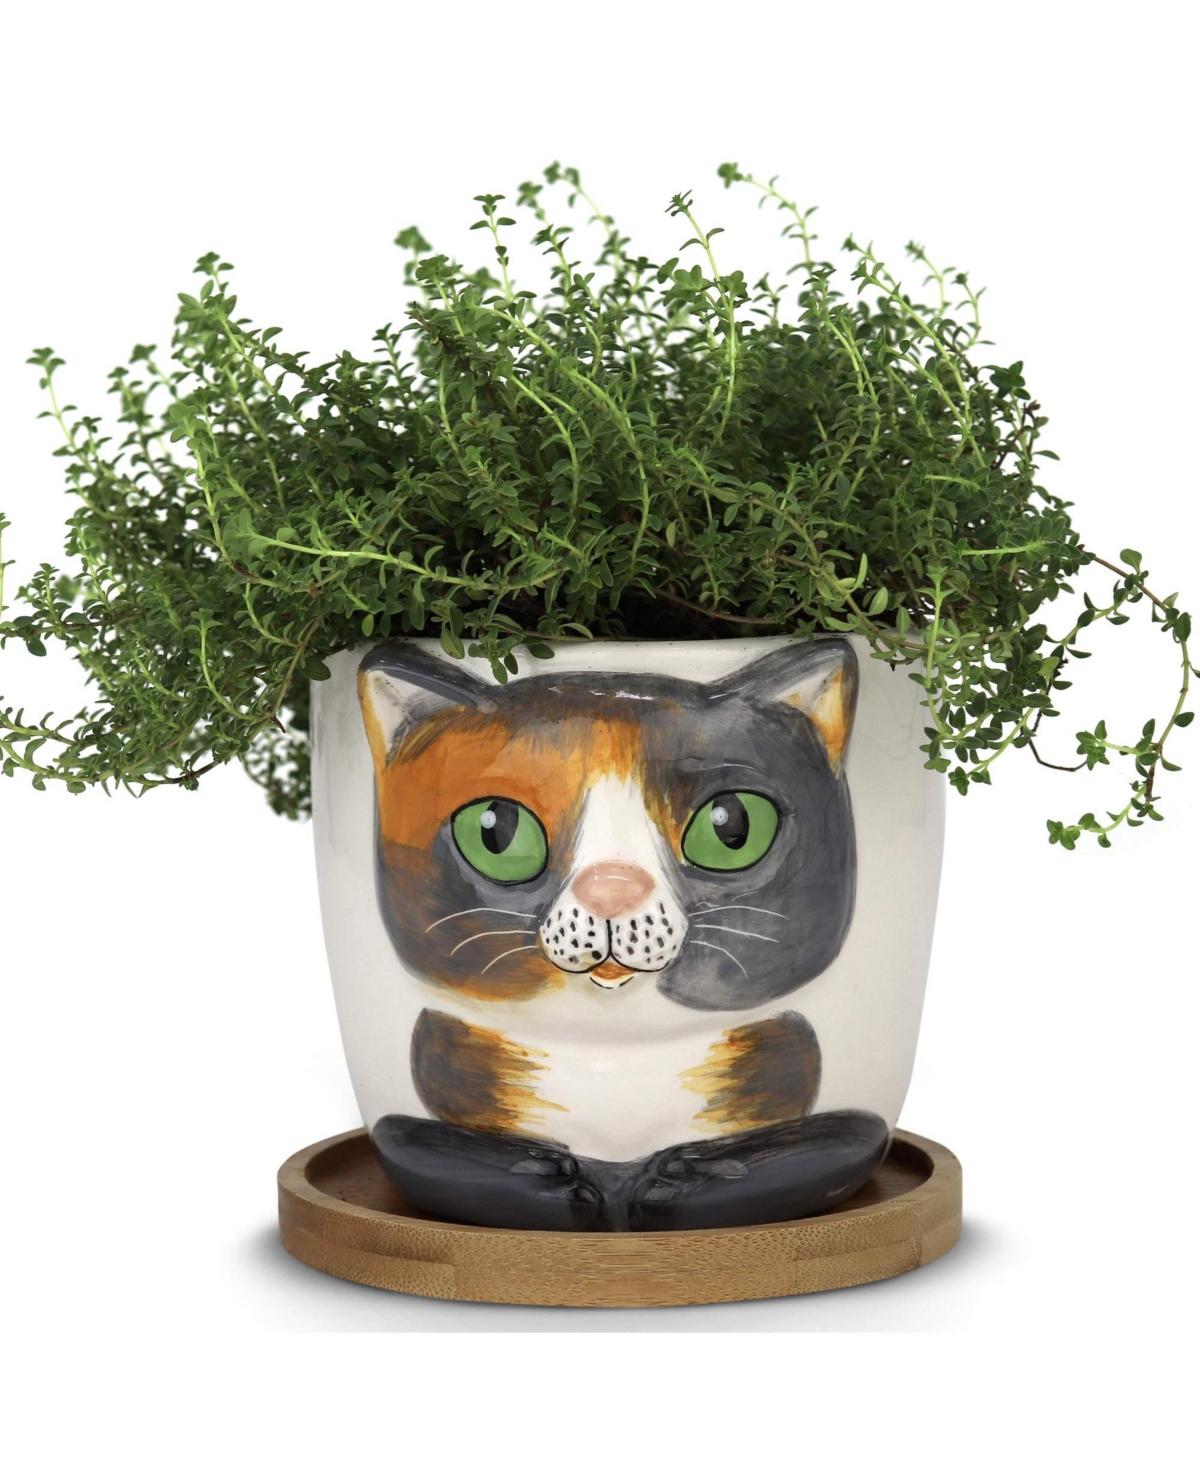 Animal Planters - Large Kitty Pot (Barney) Purrfect for Indoor Live House Plants, Succulents, Flowers and Herbs, Super Cute Planter Gift